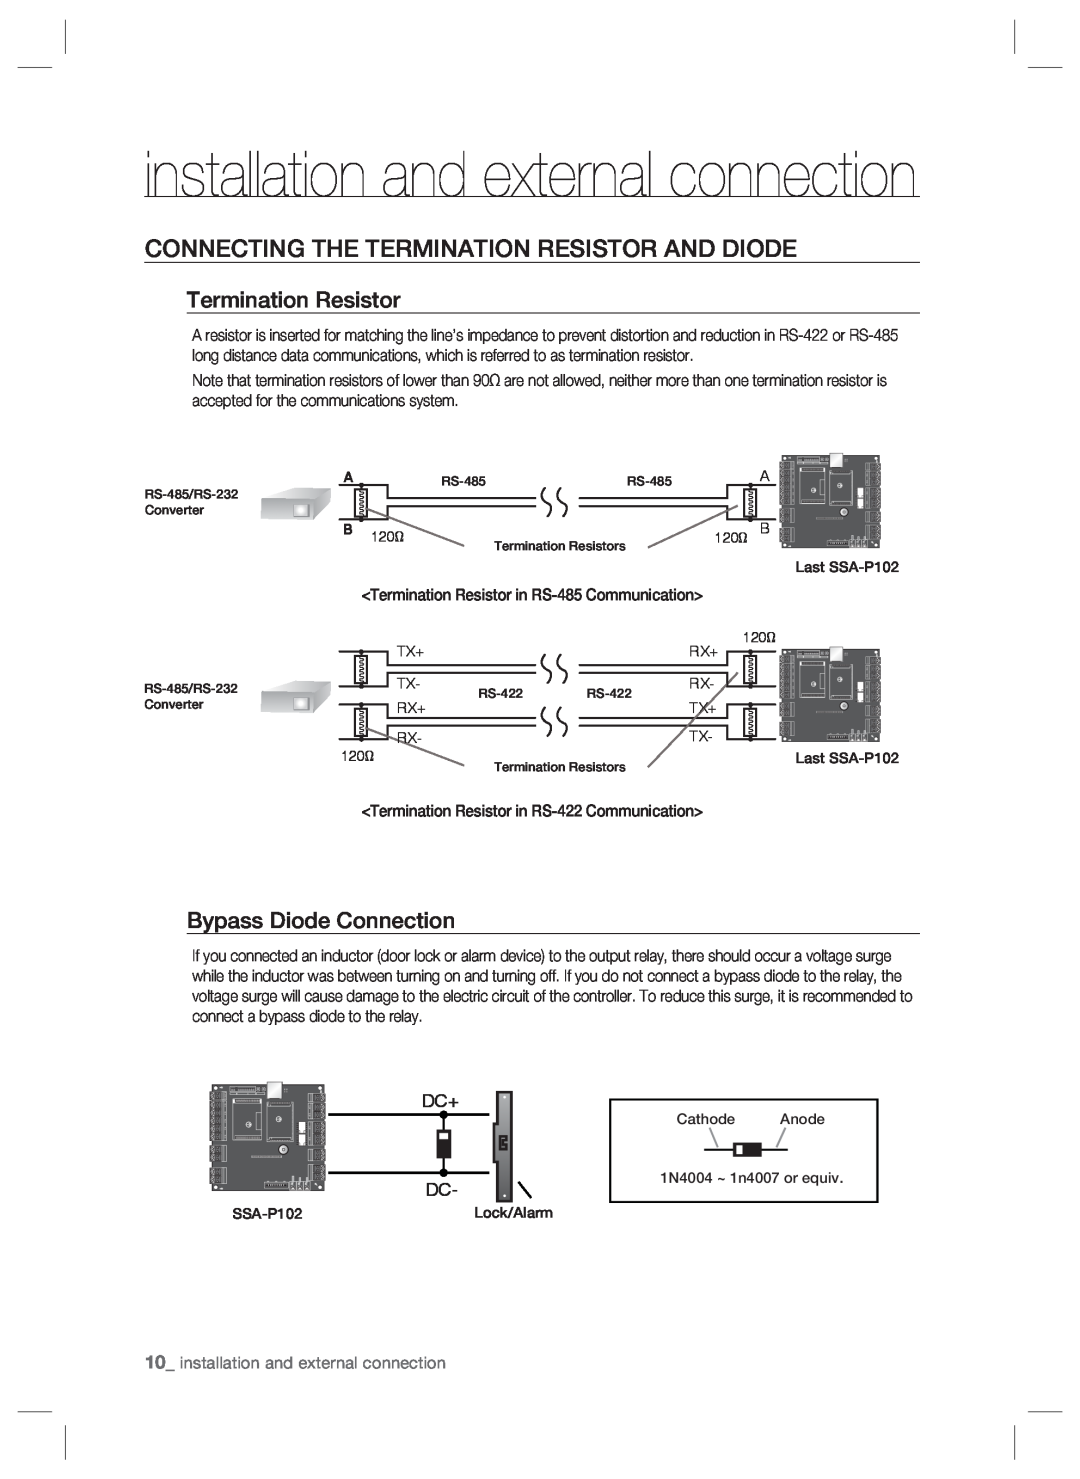 Samsung SSA-P102T installation and external connection, Connecting The Termination Resistor And Diode, Dc+ Dc 